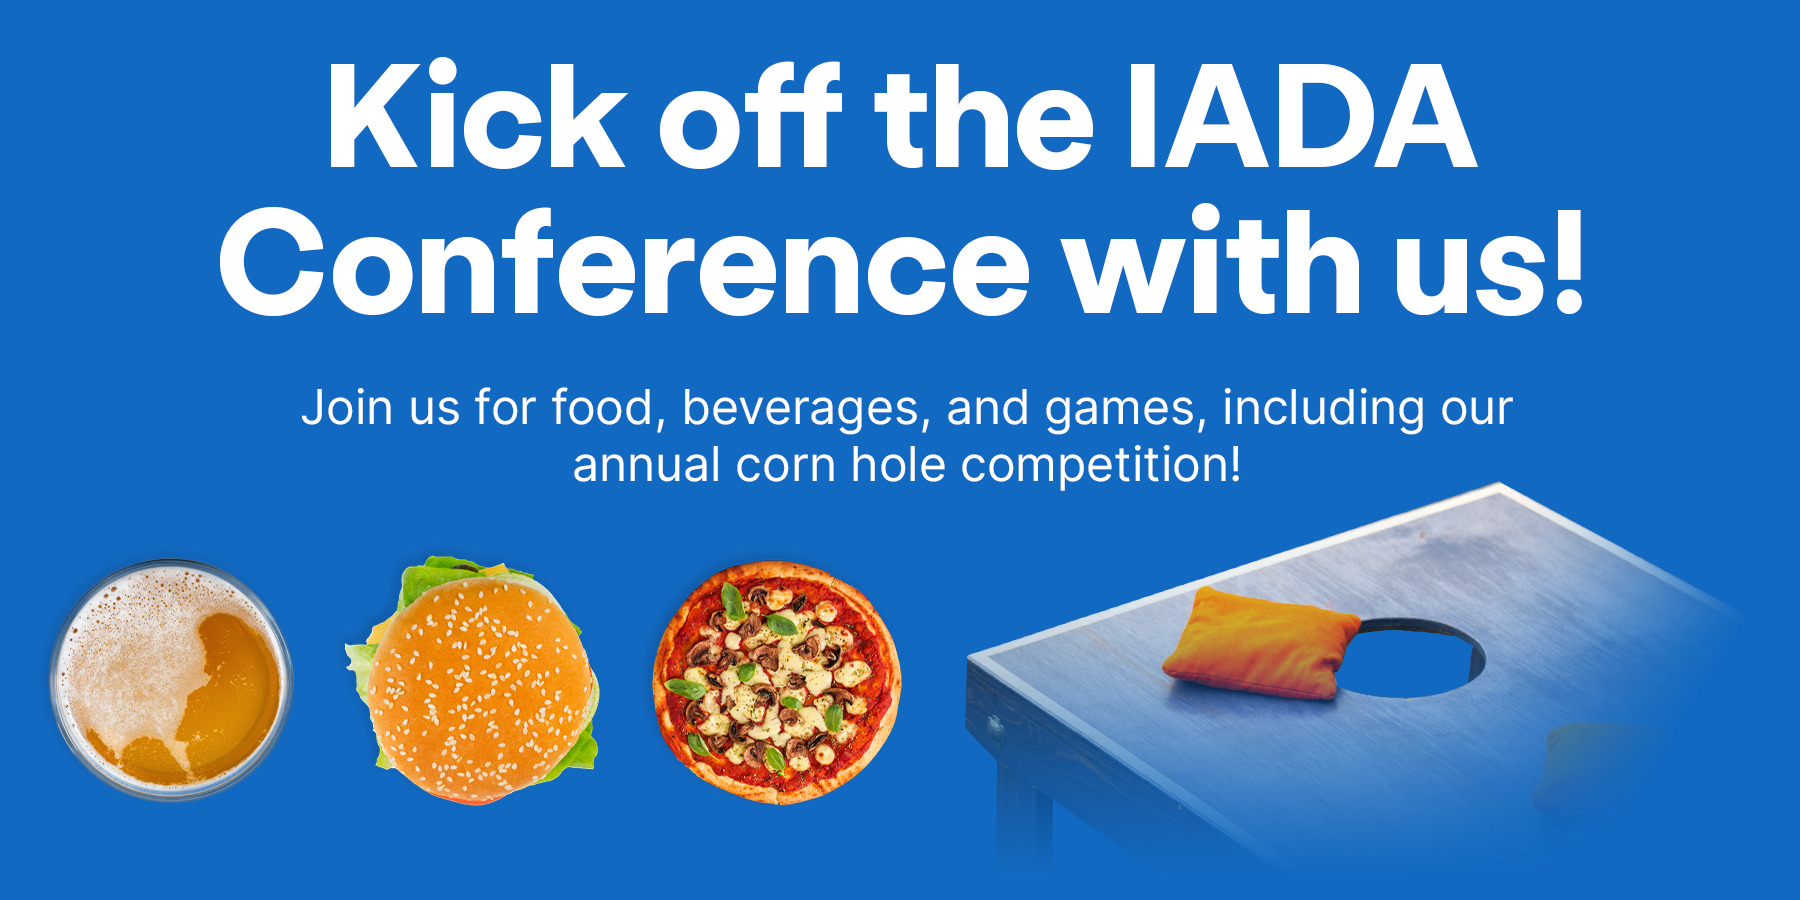 Kick of the IADA Conference with Us party image